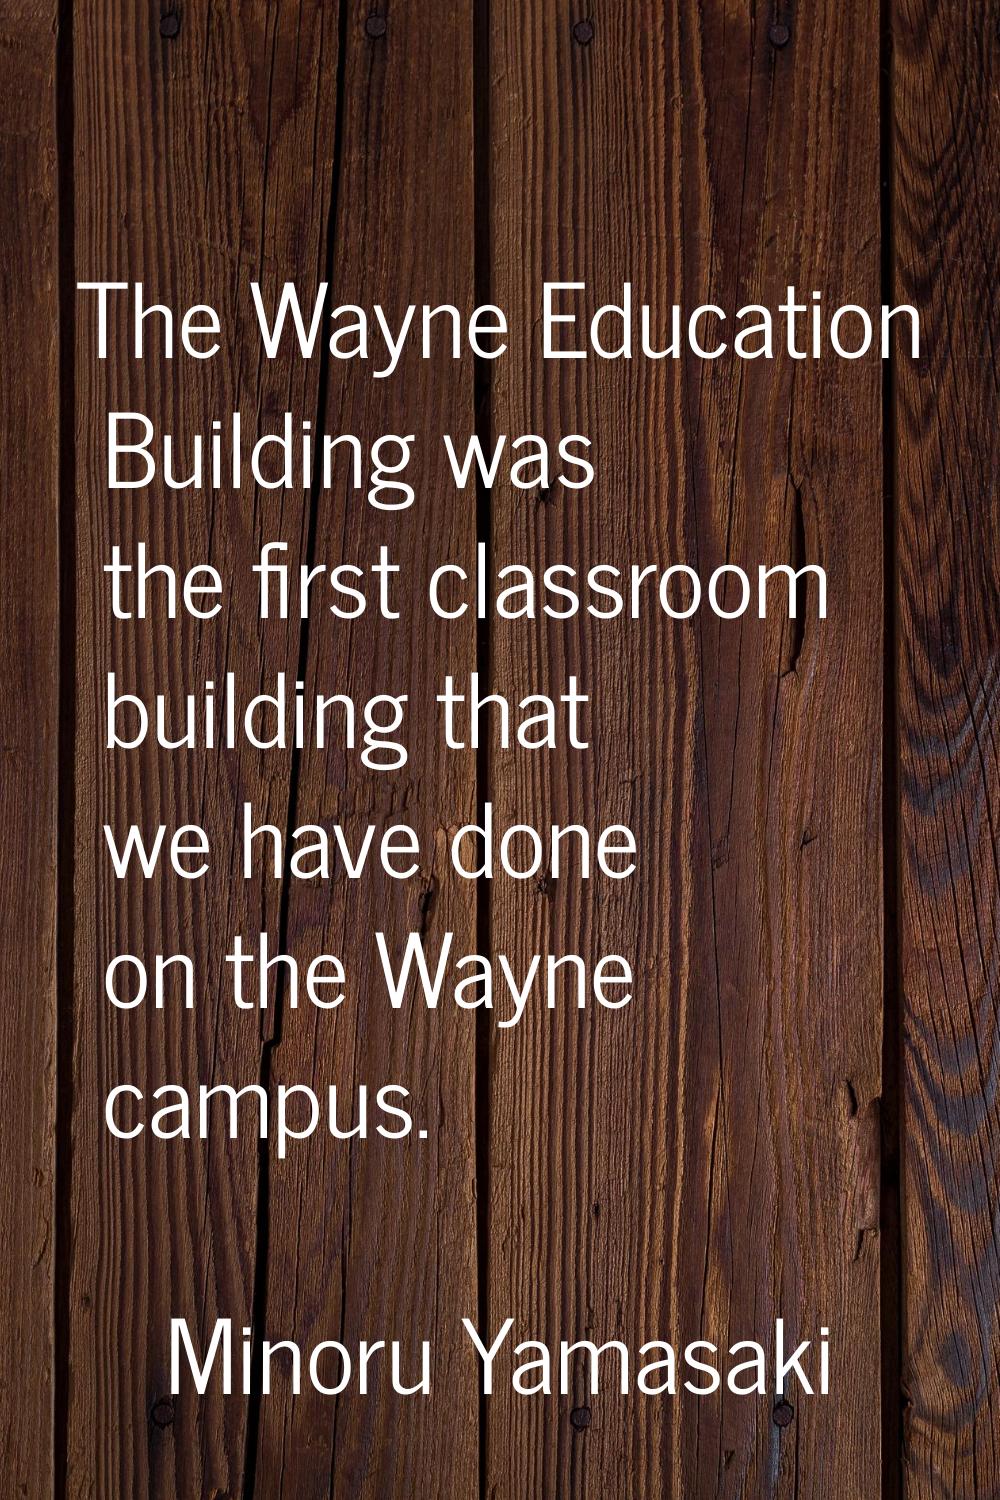 The Wayne Education Building was the first classroom building that we have done on the Wayne campus